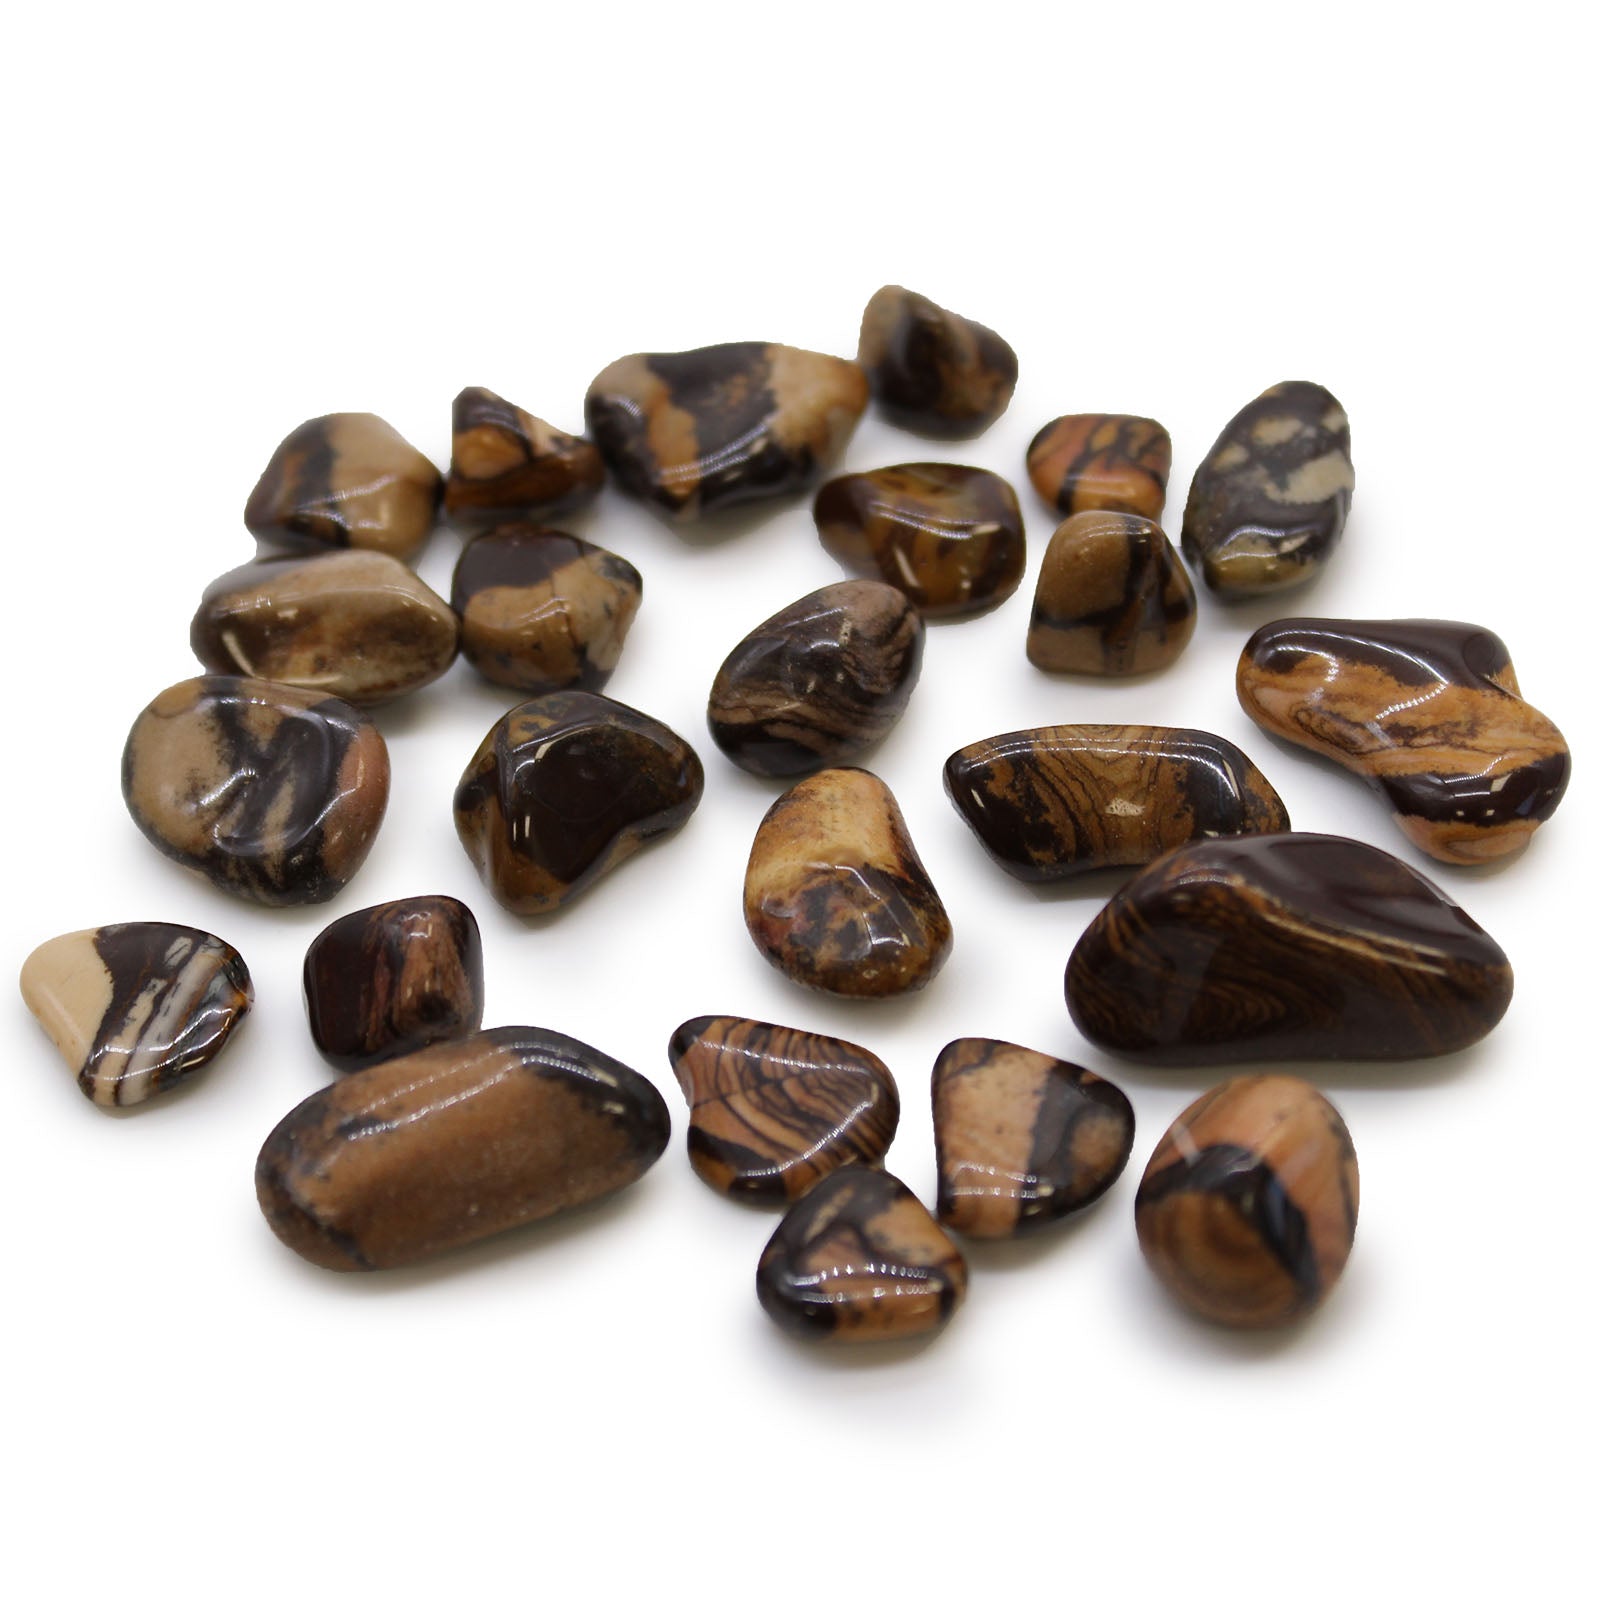 View Small African Tumble Stones Picture Nguni information